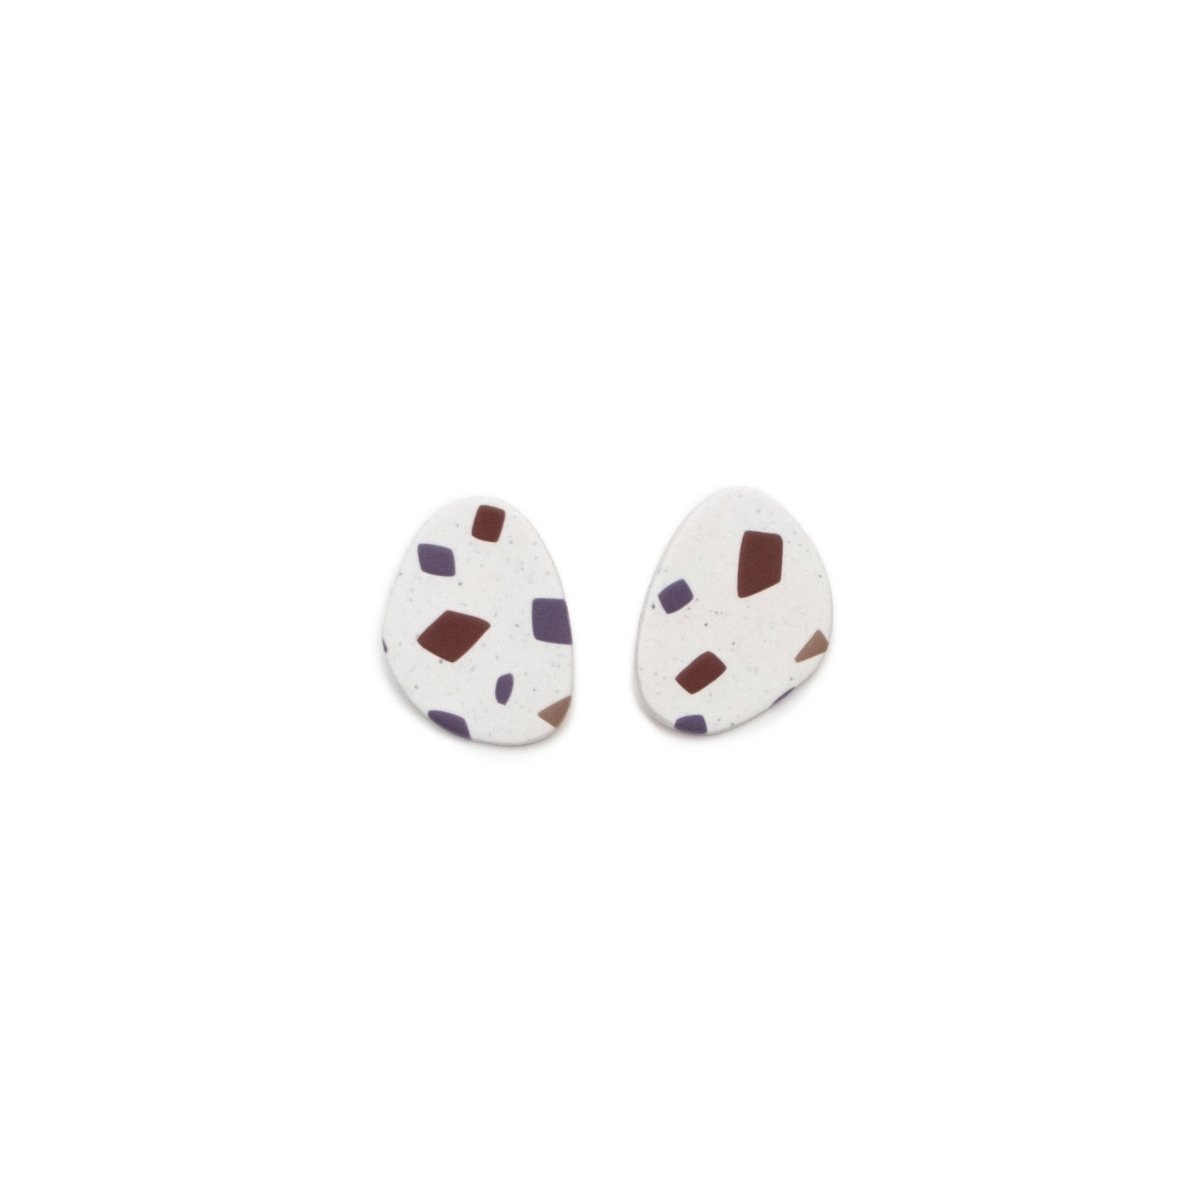 A pair of round polymer clay earrings with a brown/mauve and purple terrazzo pattern. Designed and crafted in Portland, Oregon by The Baked Clay Studio.